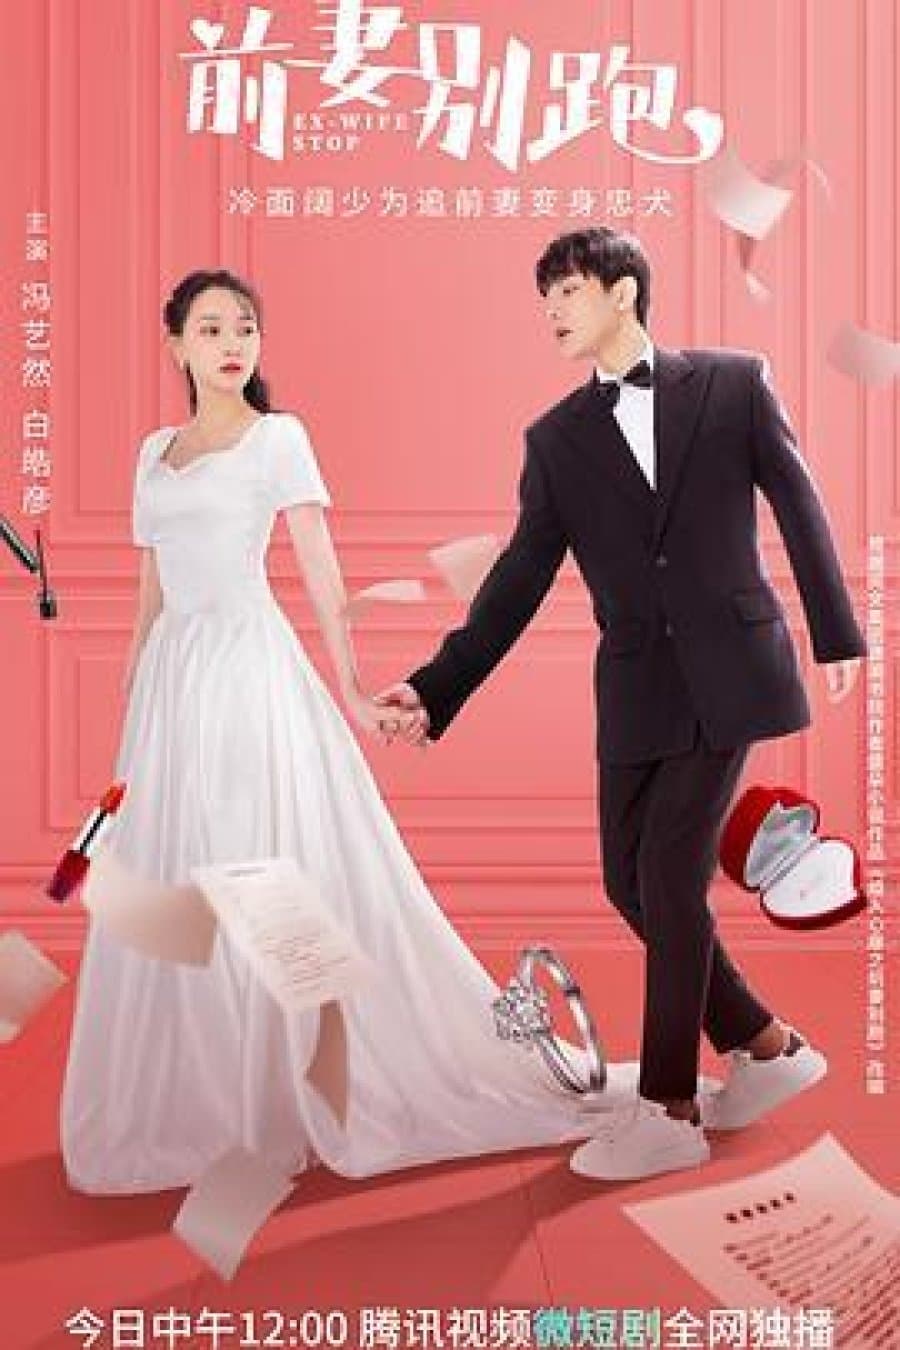 TV ratings for Ex-Wife Stop (前妻别跑) in South Korea. wetv TV series